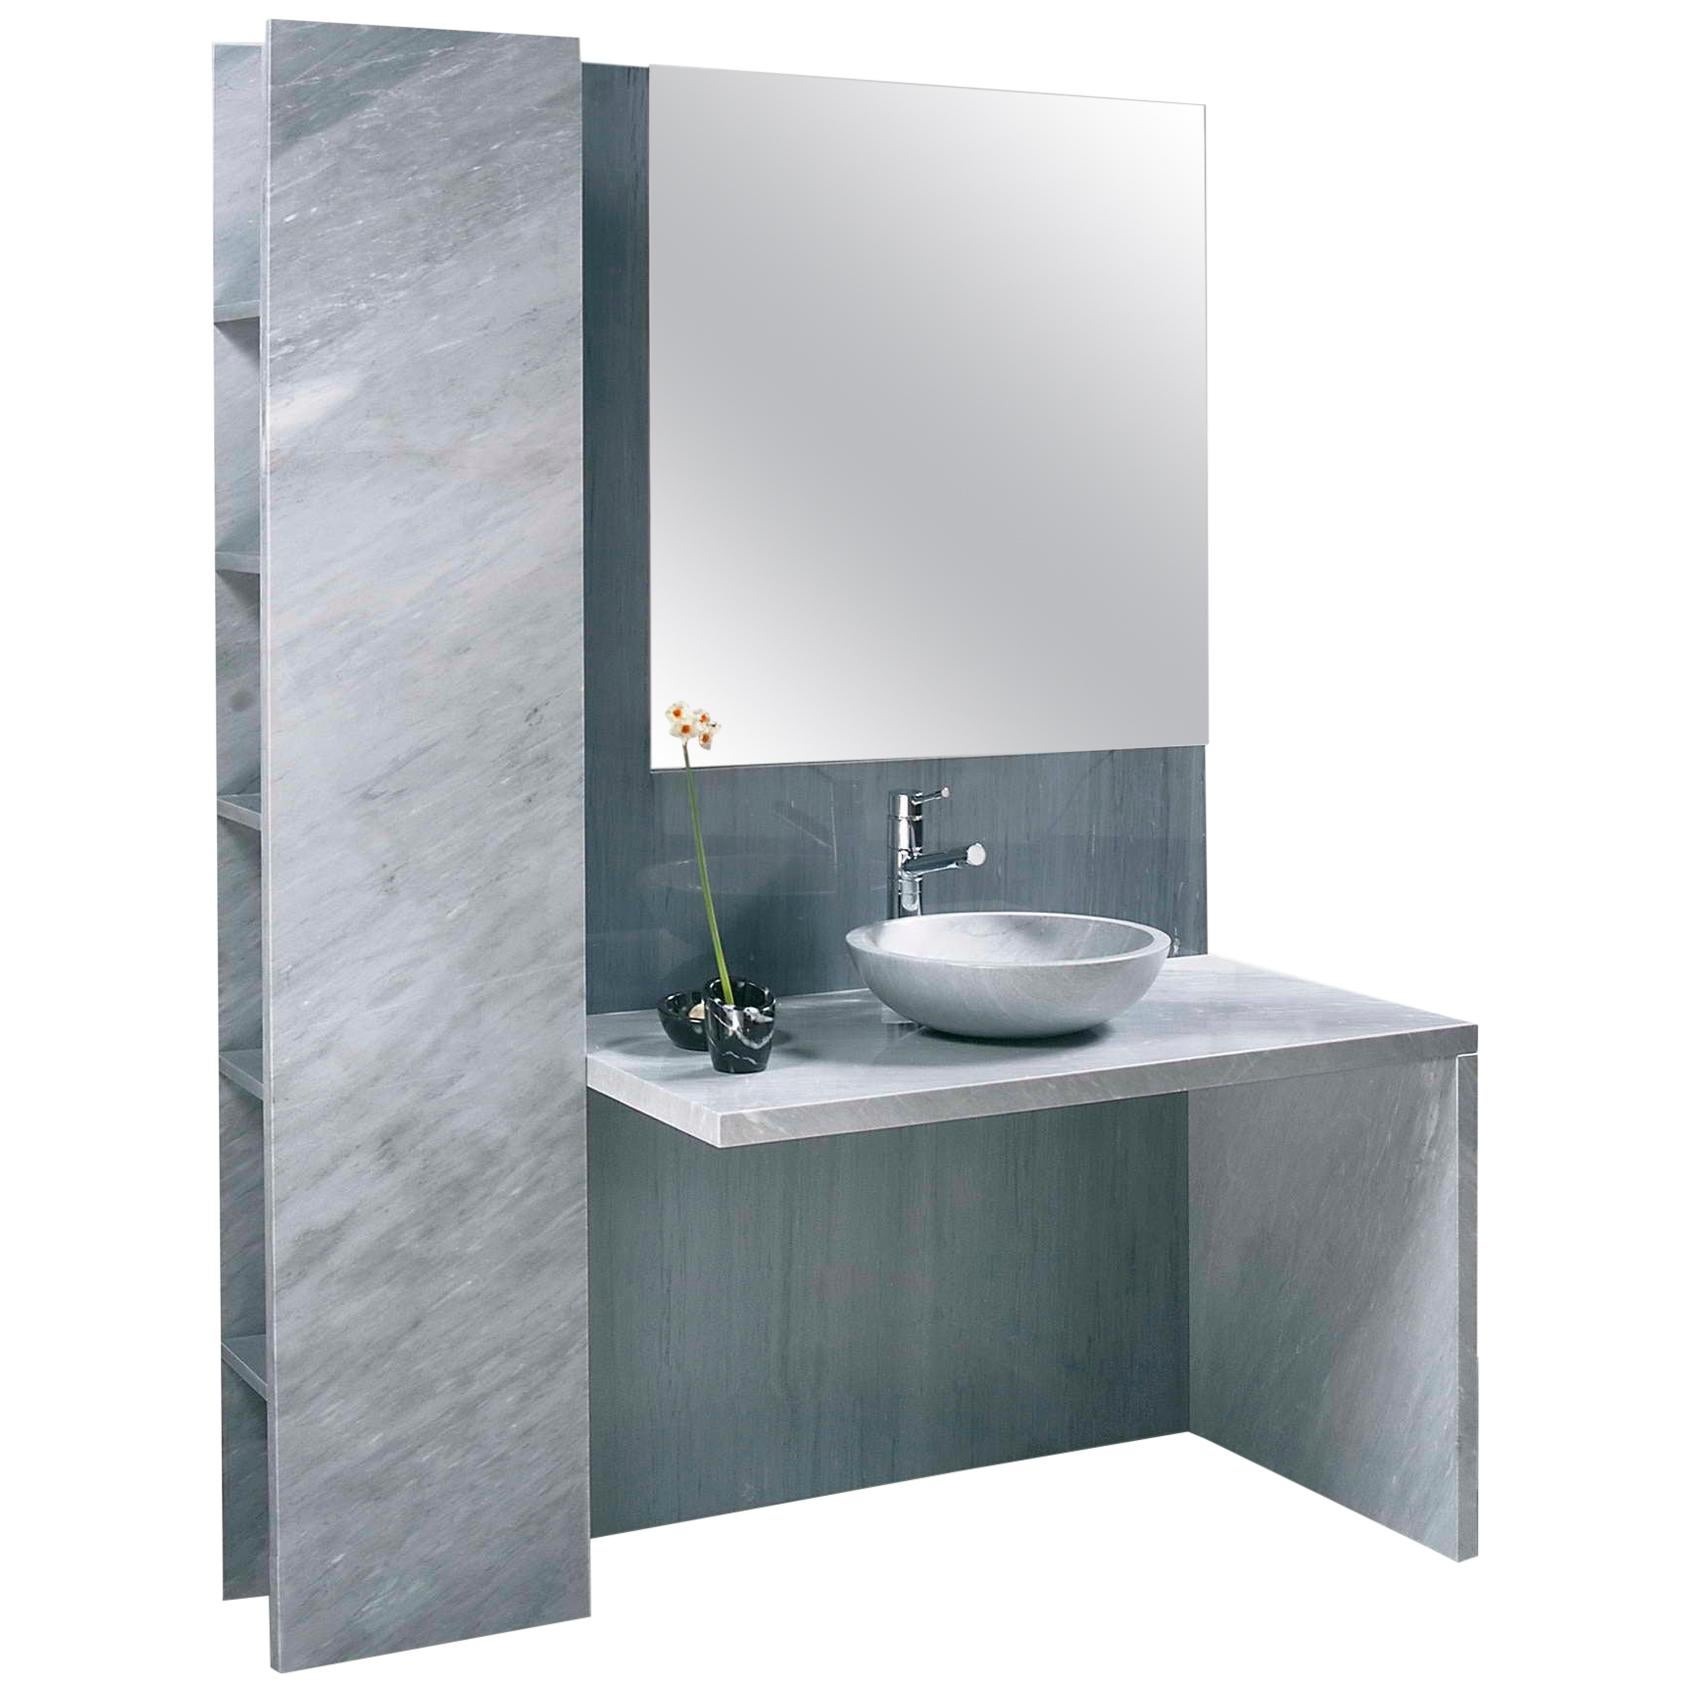 21st Century Marble Bathroom Fitted Wall in White Carrara & Bardiglio Imperiale